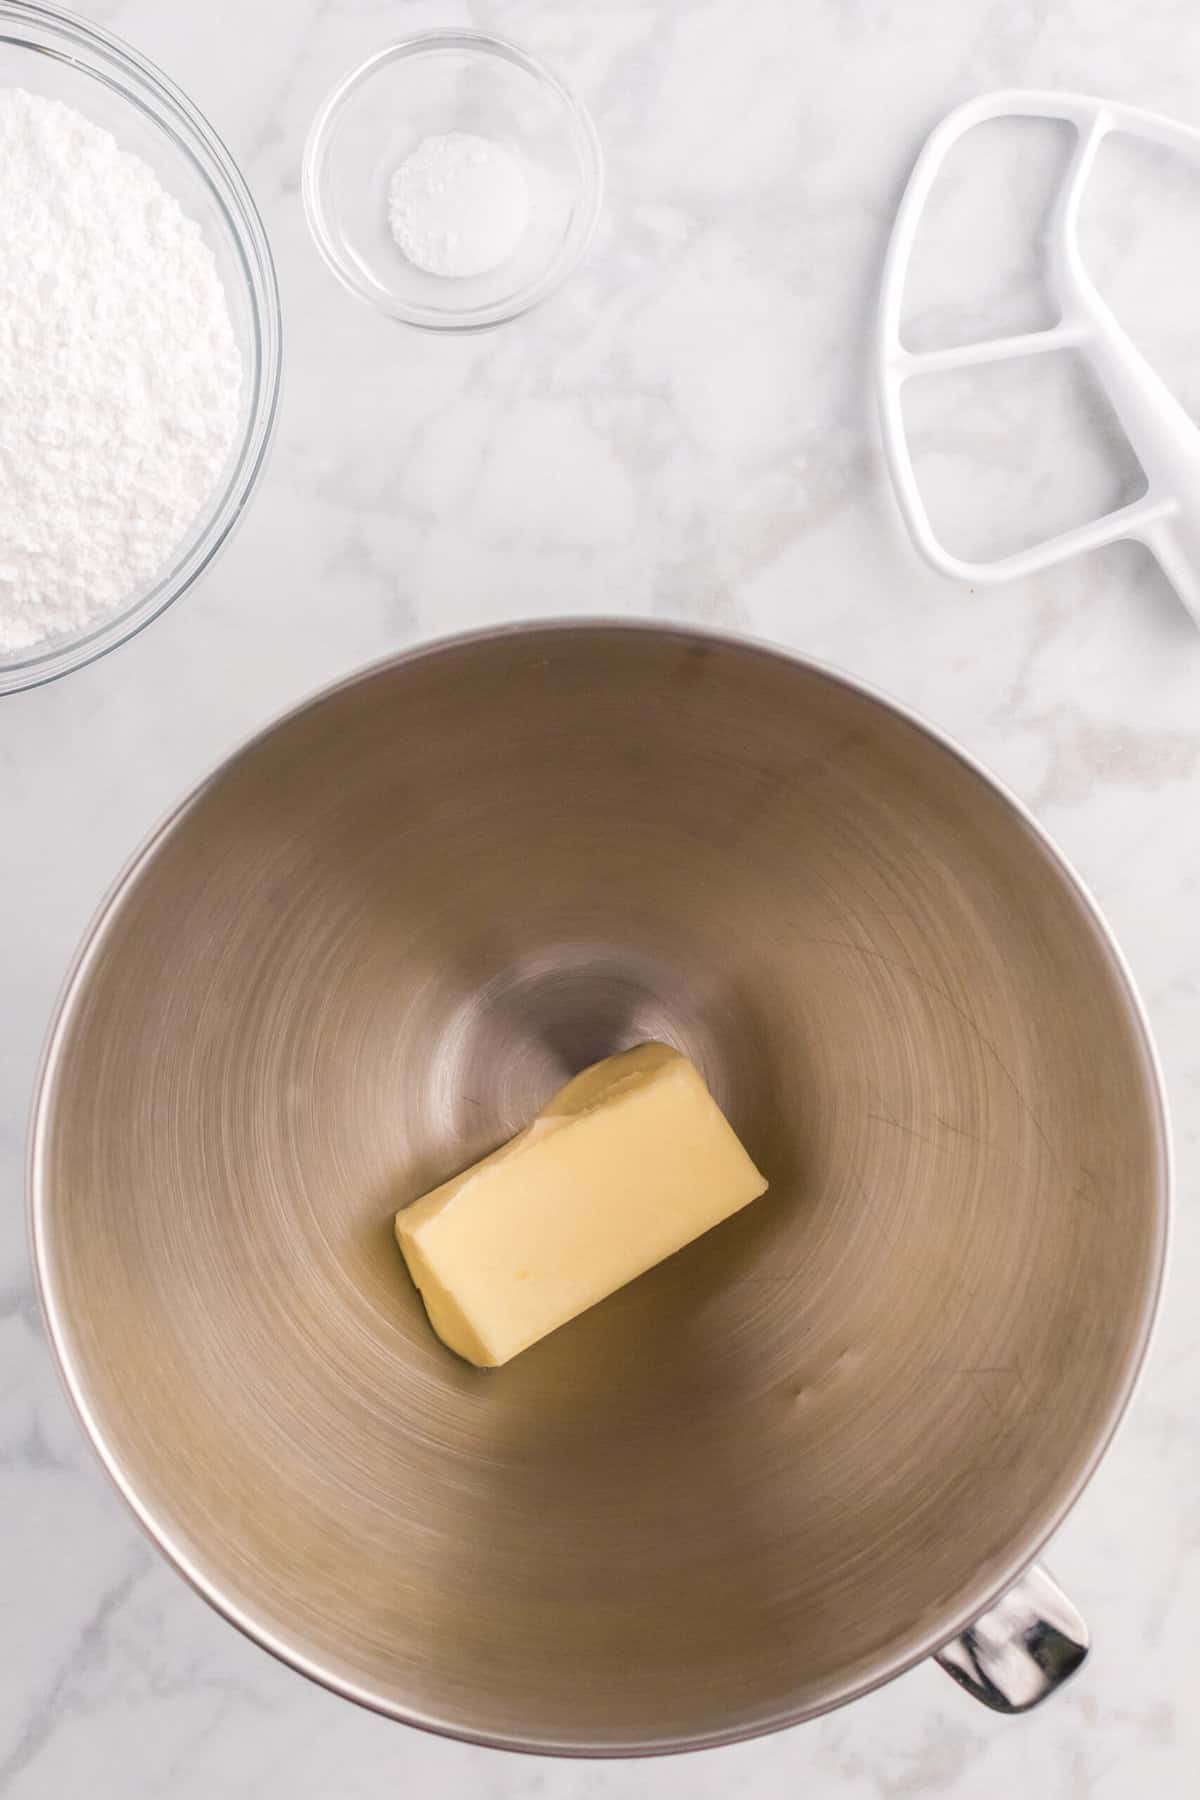 For the frosting, whip the softened butter in a mixing bowl.